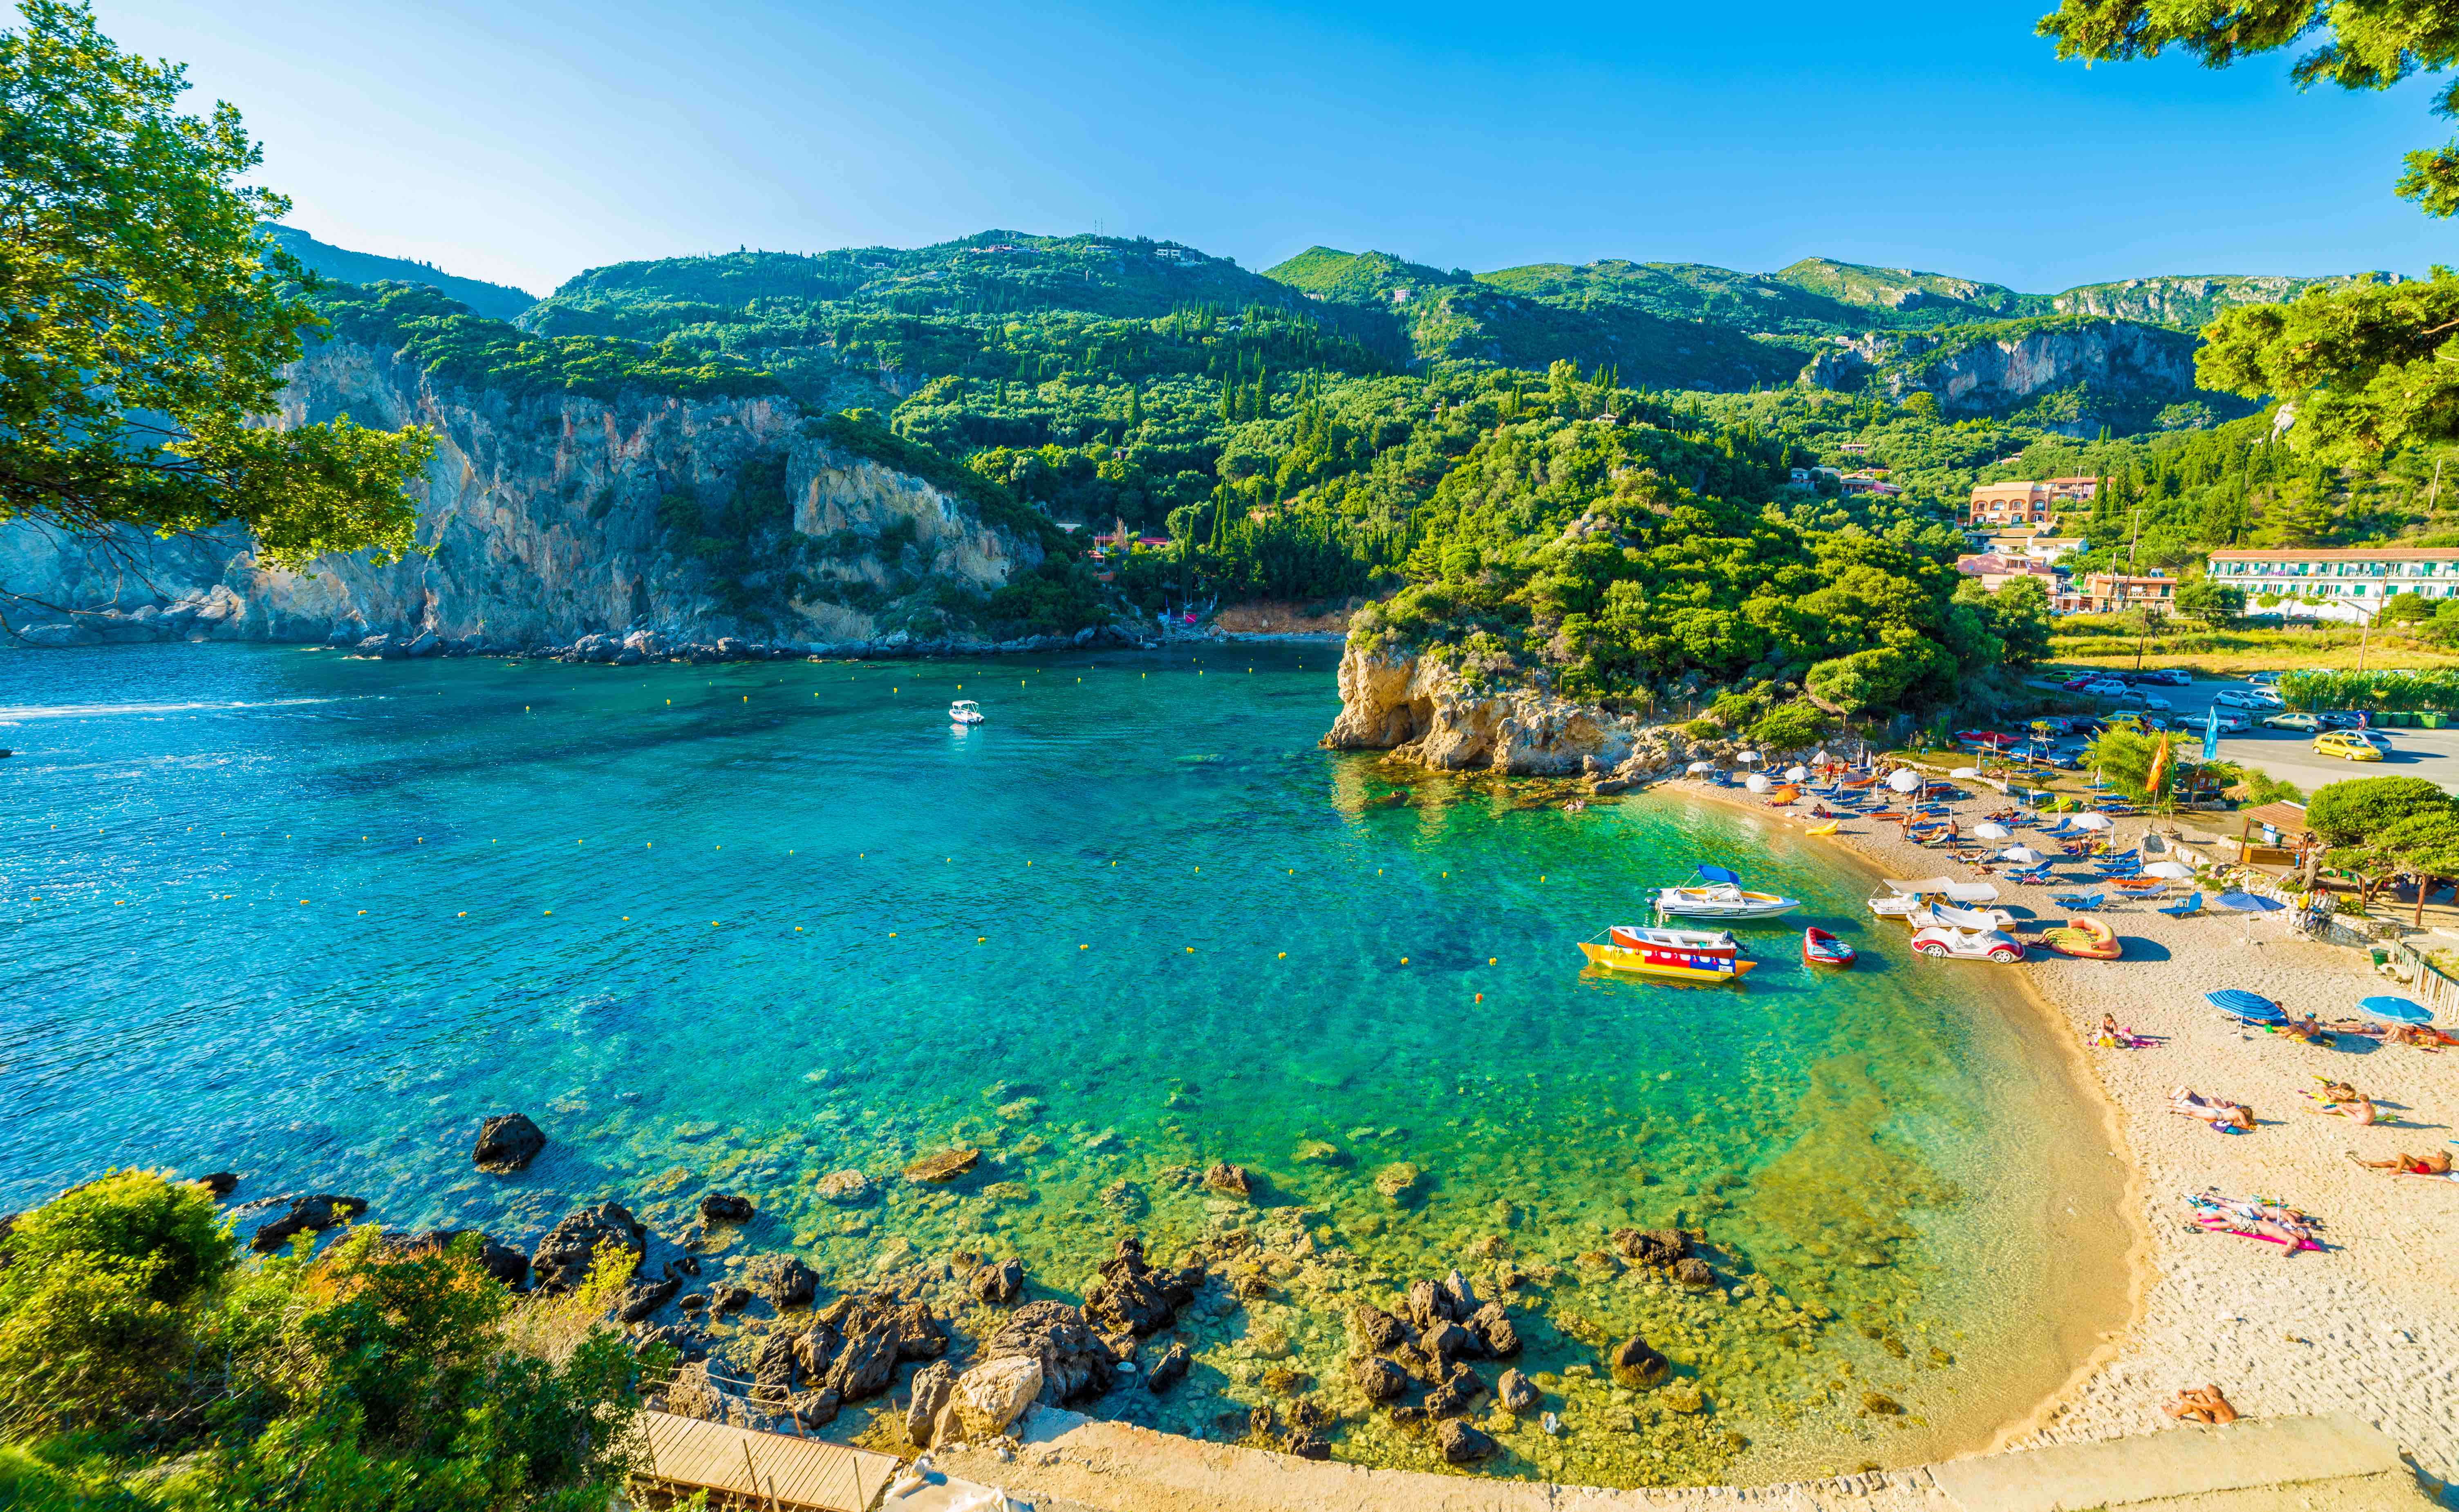 Aerial view of a beach in Corfu, Greece